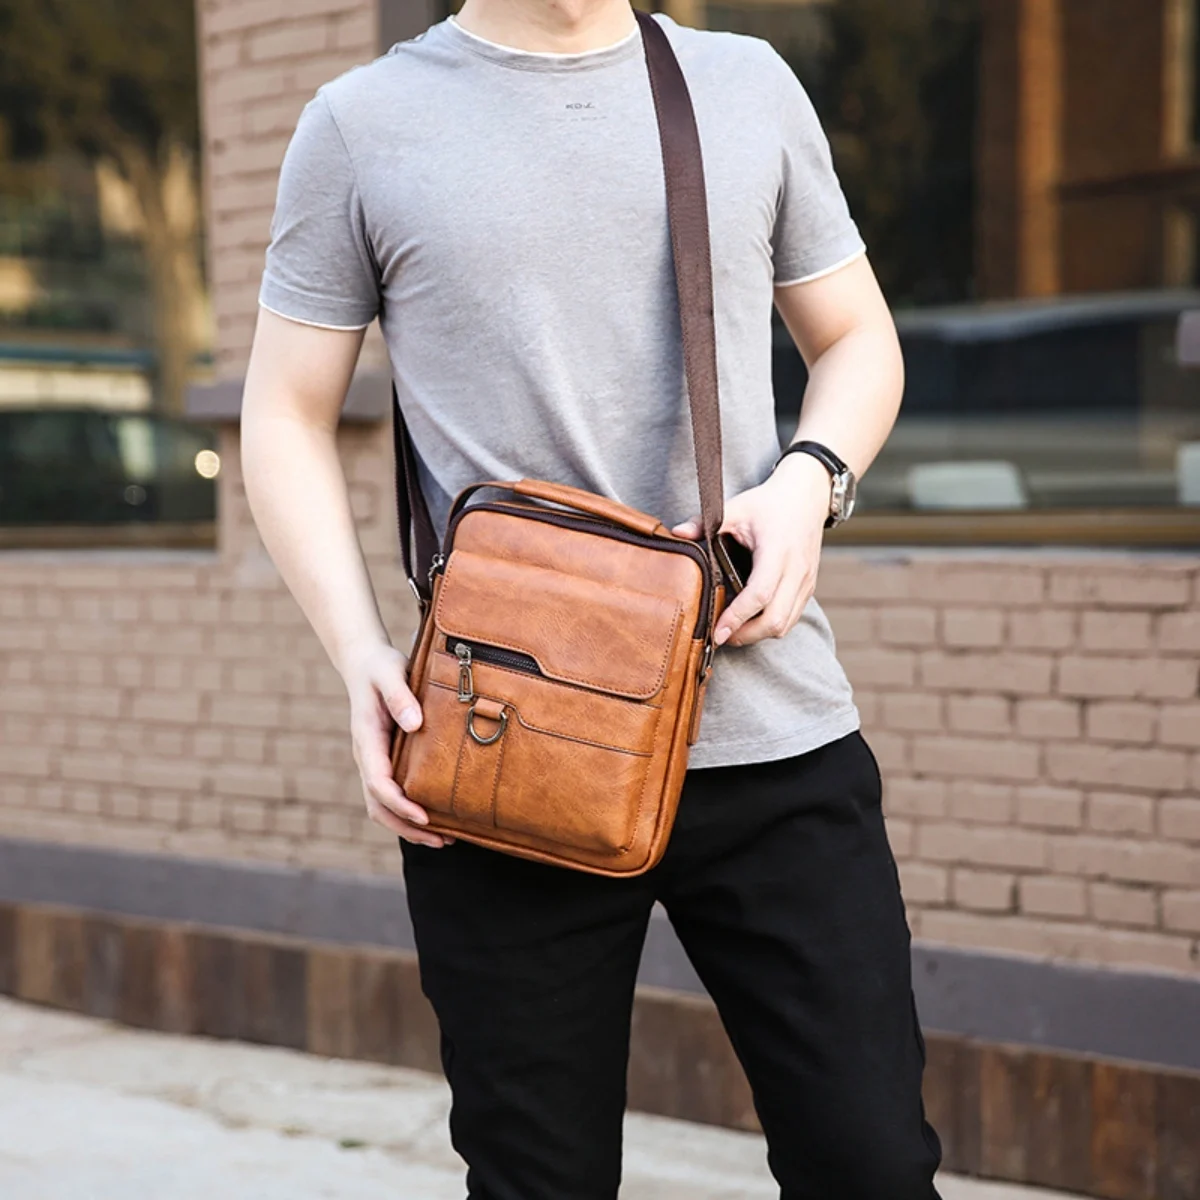 Men's Bag, Leather Bag, Can Be Worn on One Shoulder, Crossbody, Handheld, Large Capacity, for Business and Leisure